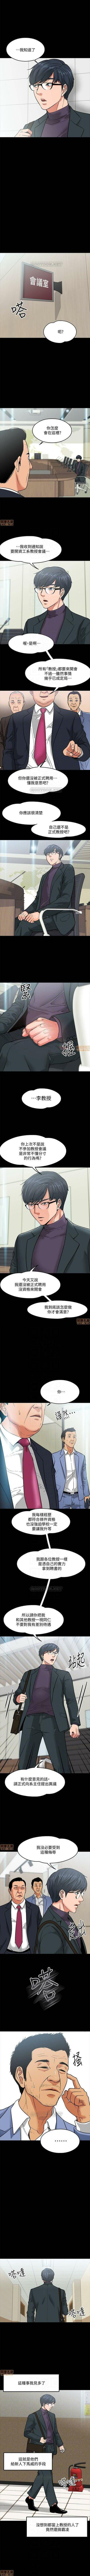 PROFESSOR, ARE YOU JUST GOING TO LOOK AT ME? | DESIRE SWAMP | 教授，你還等什麼? Ch. 3 [Chinese] Manhwa 3